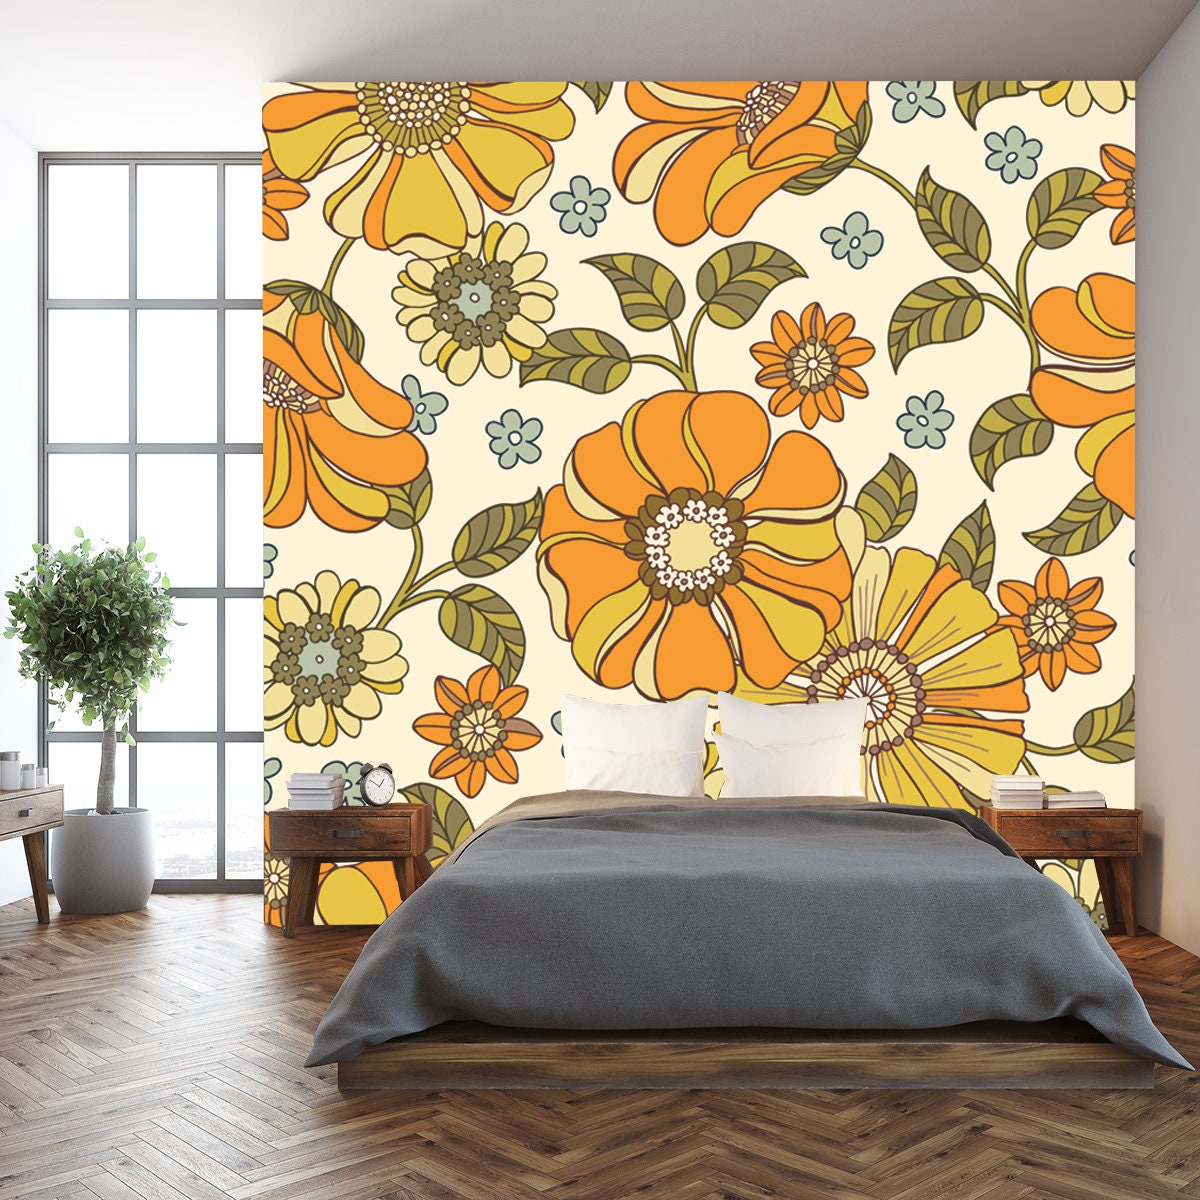 Colorful Large Scale Hand-Drawn Floral Retro 70s Style Nostalgic Wallpaper Bedroom Mural